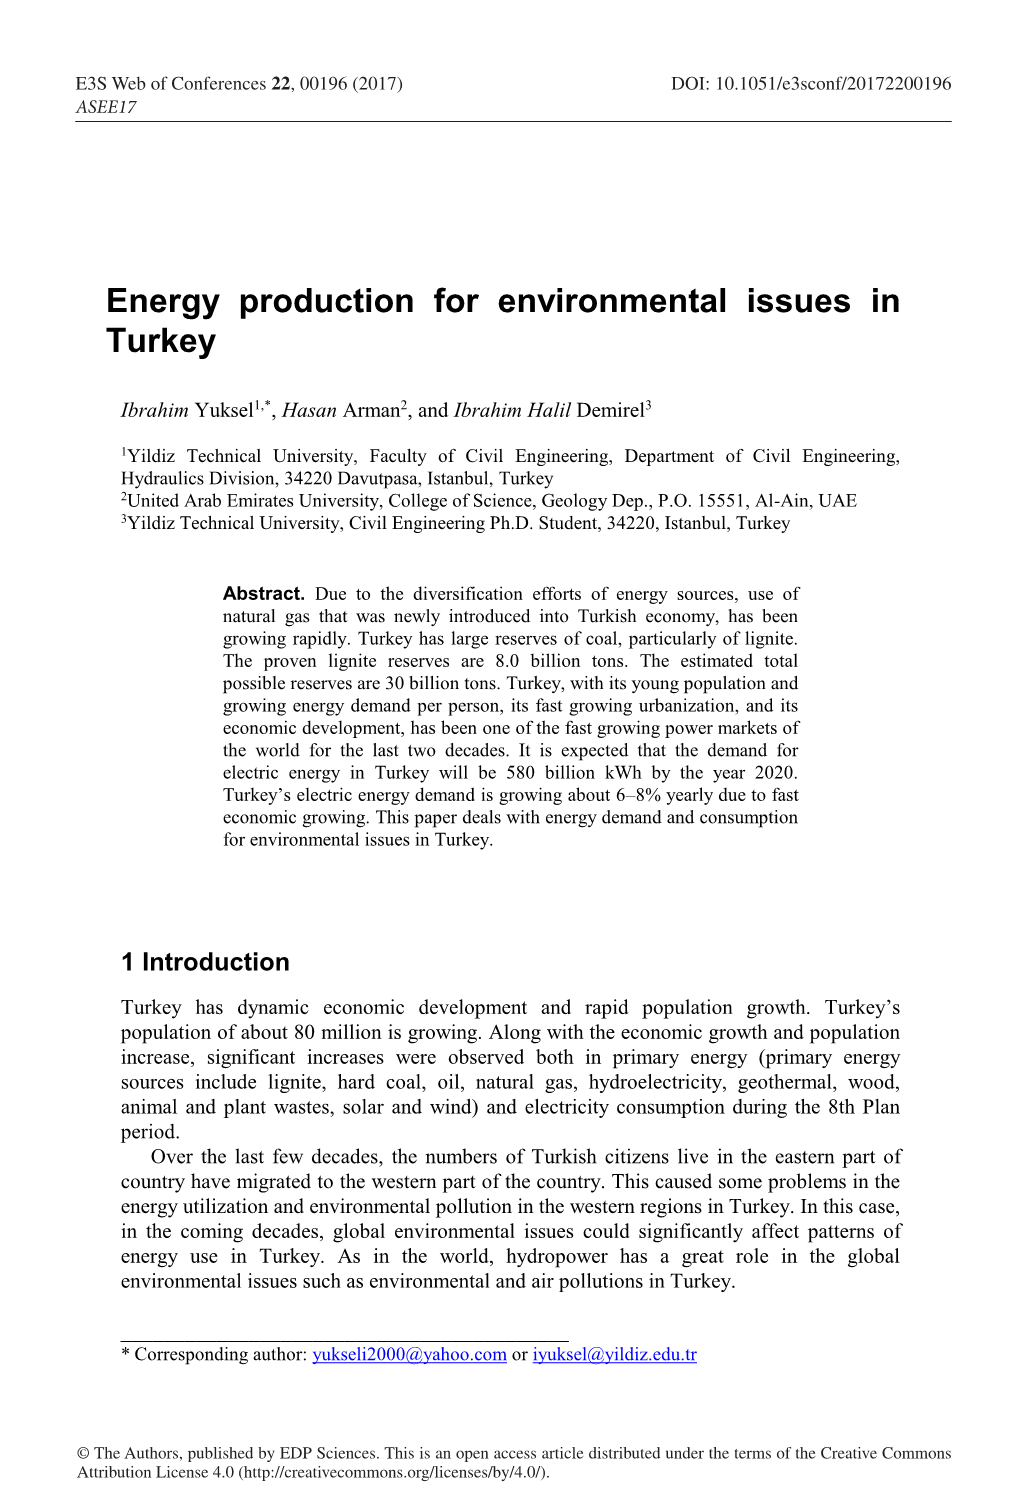 Energy Production for Environmental Issues in Turkey